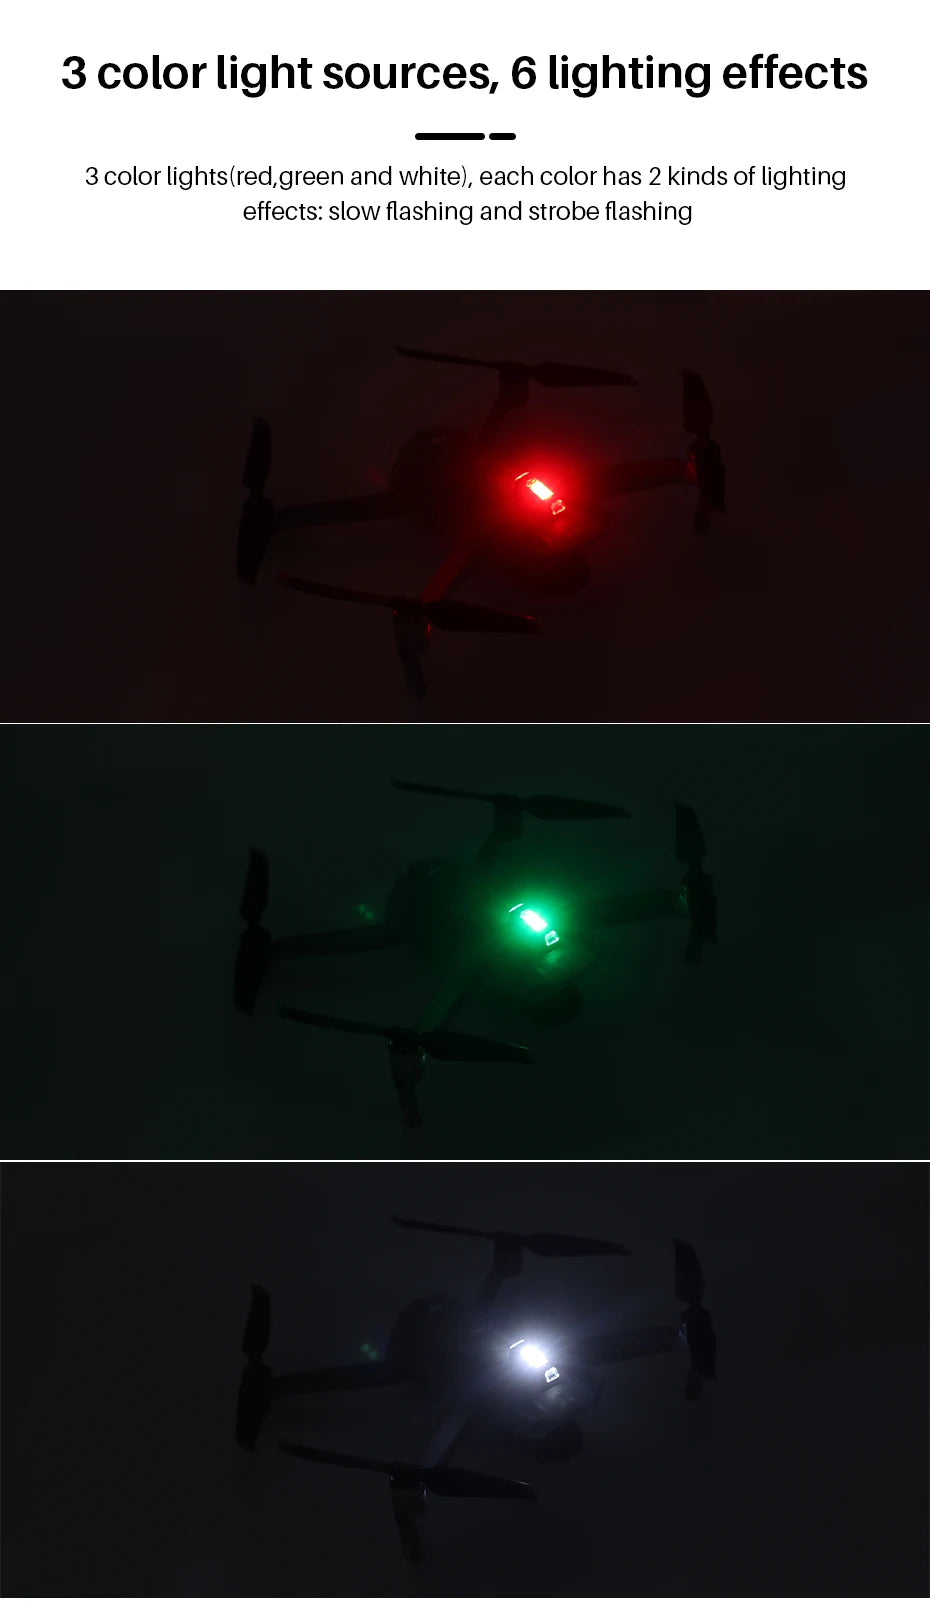 3 color light sources, 6 lighting effects 3 color lights(red,green and white), each